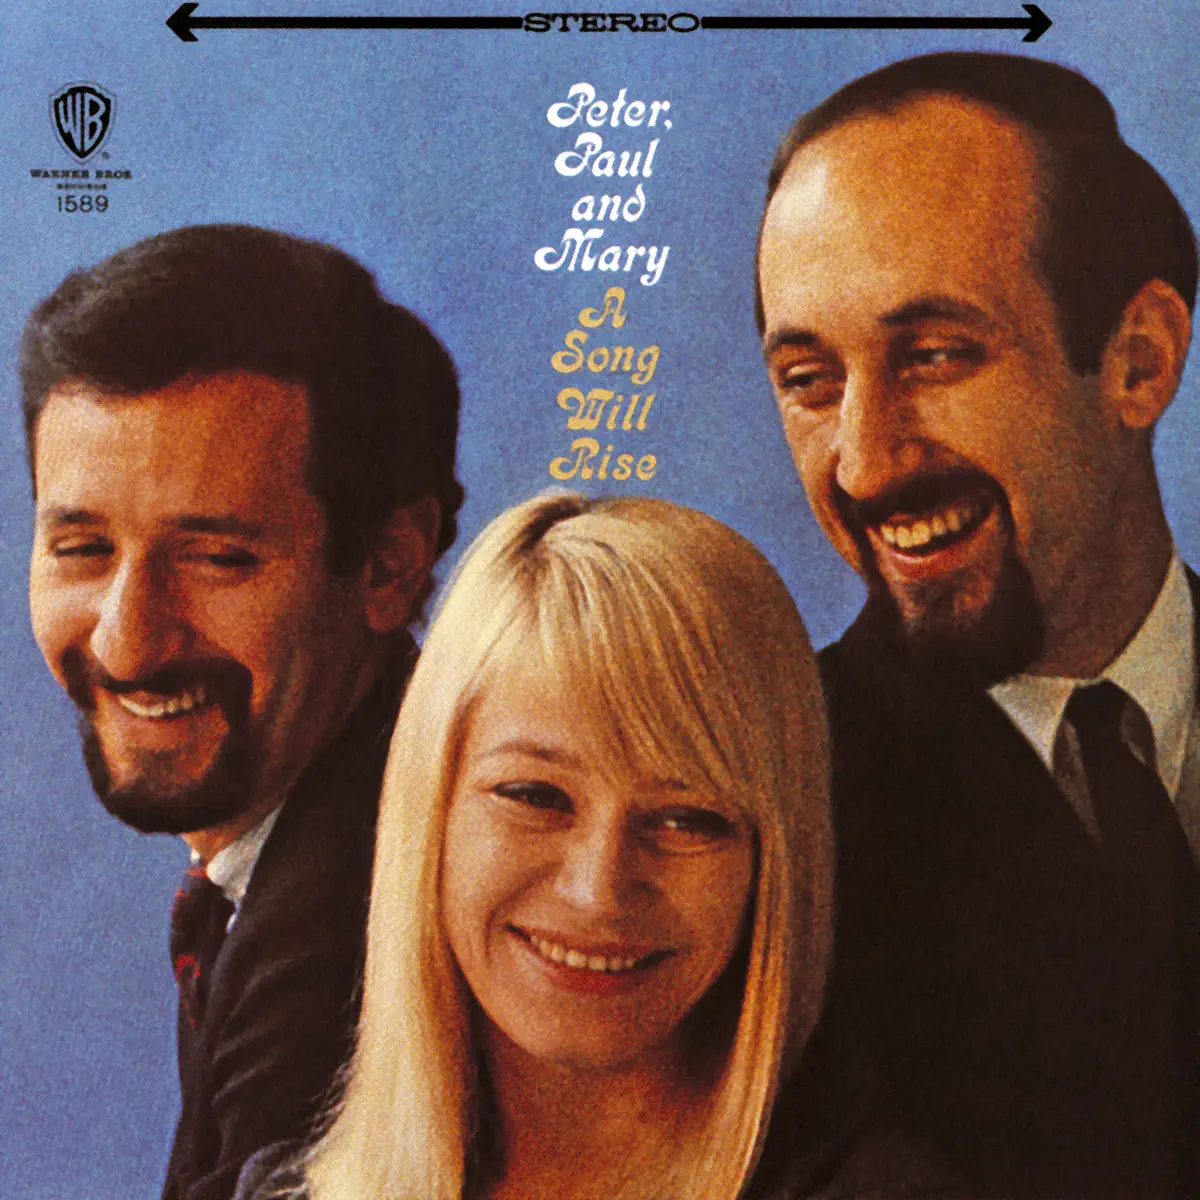 Peter, Paul & Mary - A Song Will Rise (1965) [iTunes Plus AAC M4A]-新房子